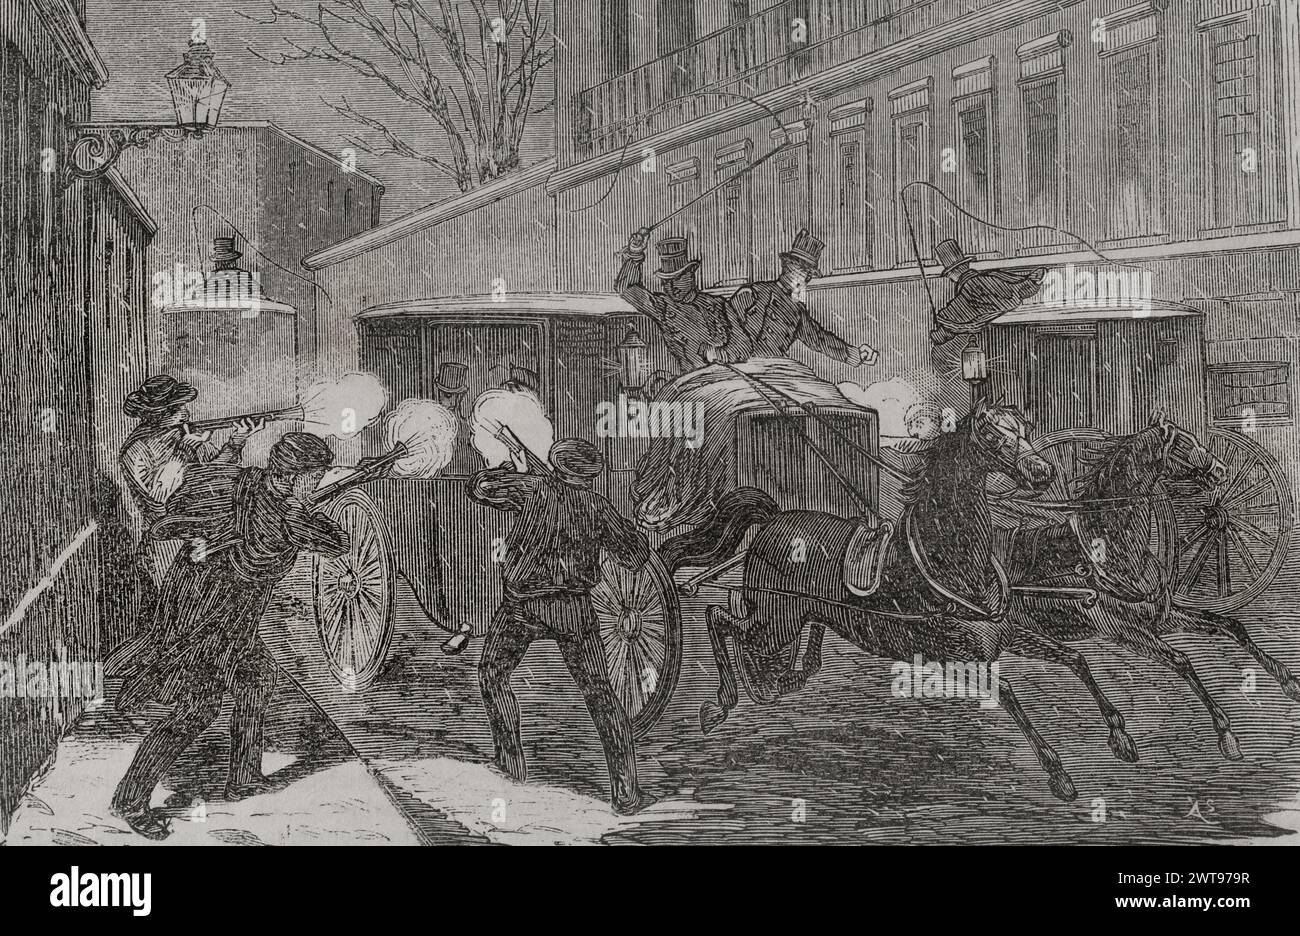 History of Spain. Madrid. Attack on General Prim (1814-1870) in calle del Turco (Turk Street) on 27 December 1870. Armed men with blunderbusses attacked his carriage as he was on the way to his residence in the Buenavista Palace. He died three days later from the wounds he had sustained. Engraving. 'Historia de la Guerra de Francia y Prusia' (History of the War between France and Prussia). Volume II. Published in Barcelona, 1871. Stock Photo